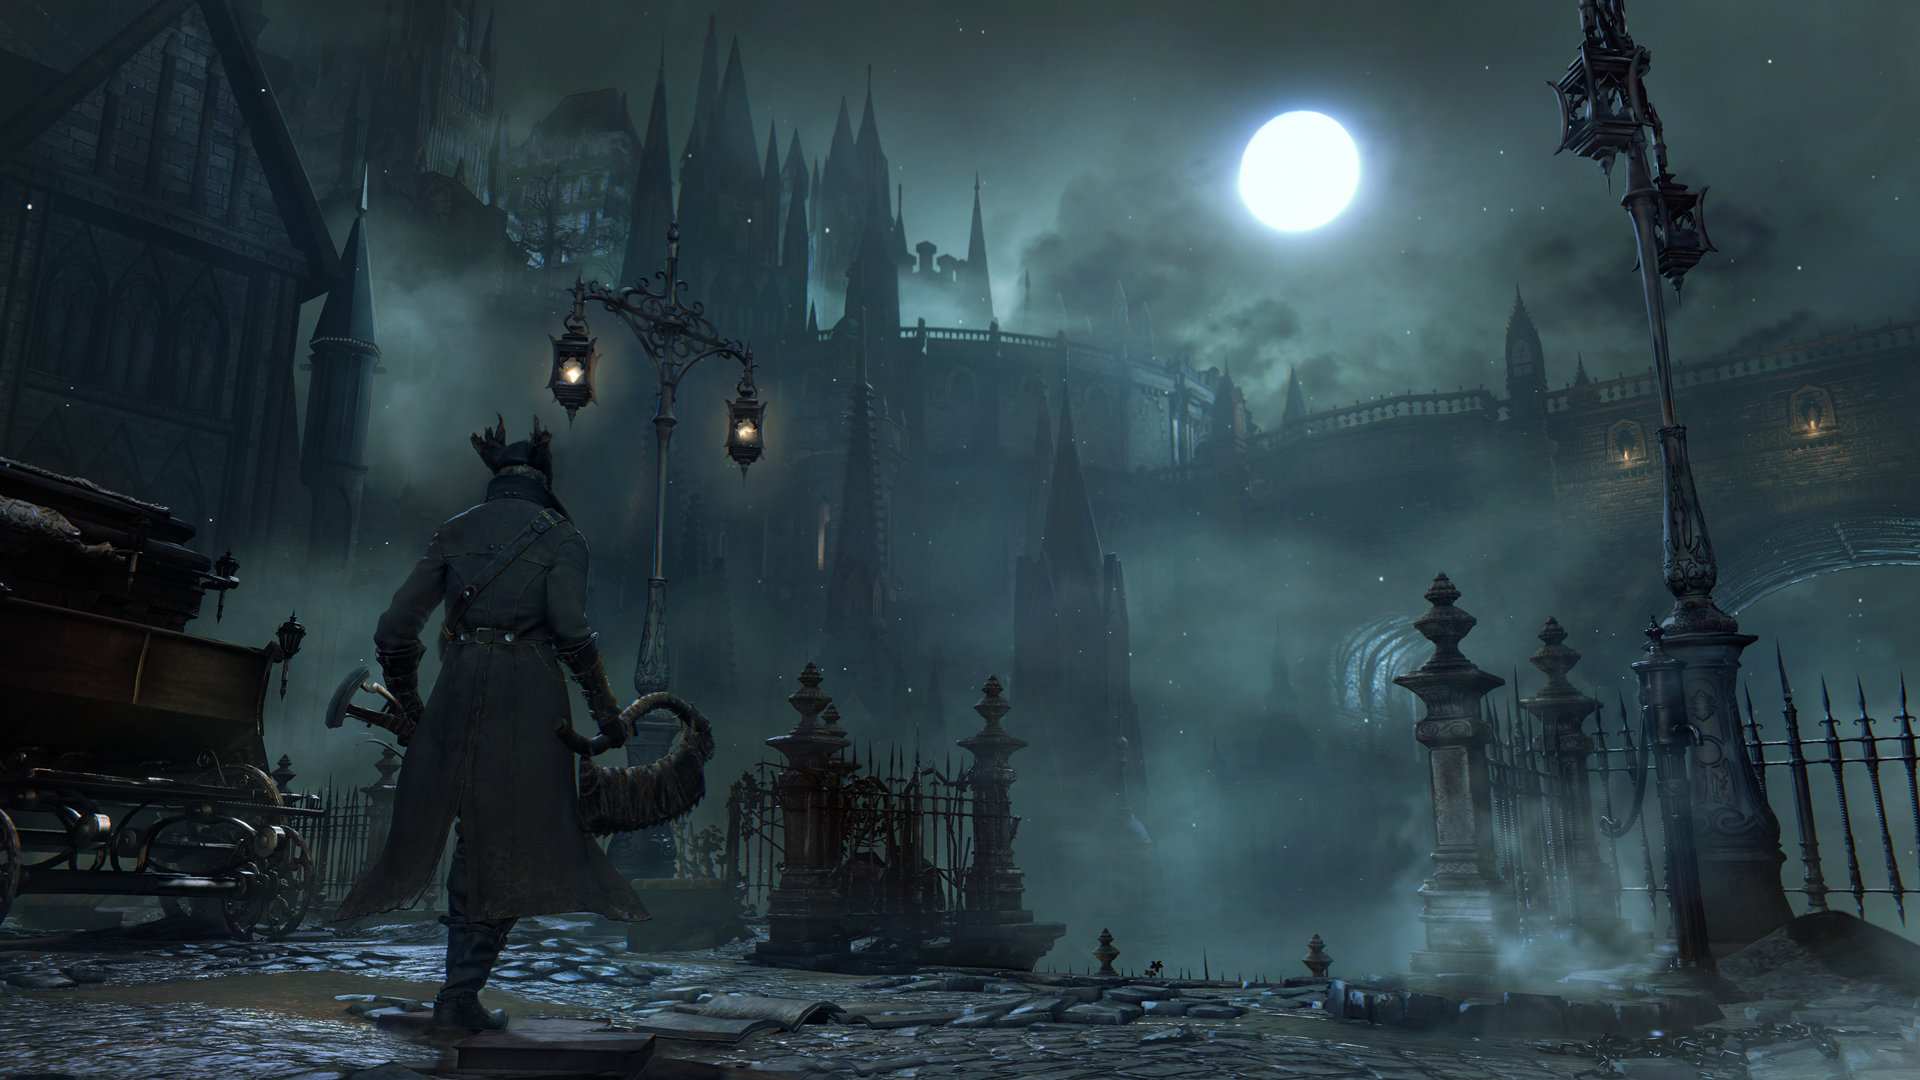 “Bloodborne” Alpha Back on Track - Ready to Show the Gory Action